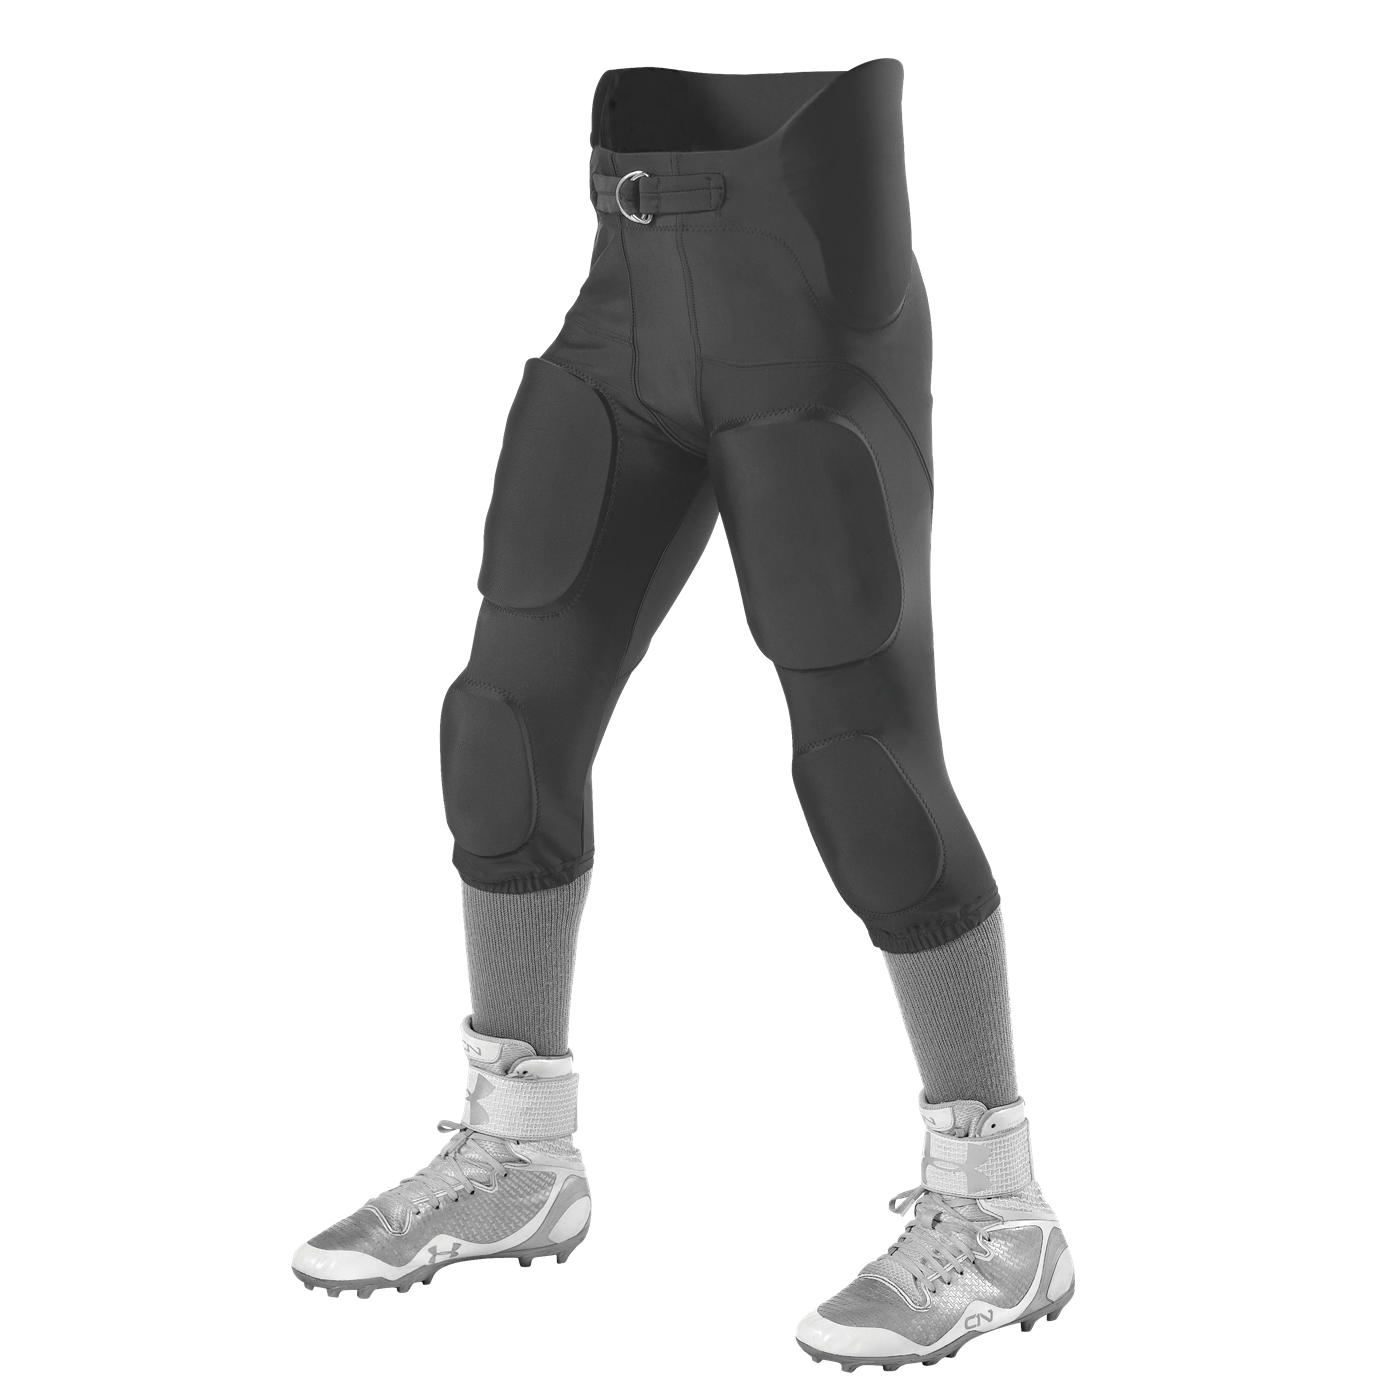 Adult Integrated Football Pant  Badger Sport - Athletic Apparel